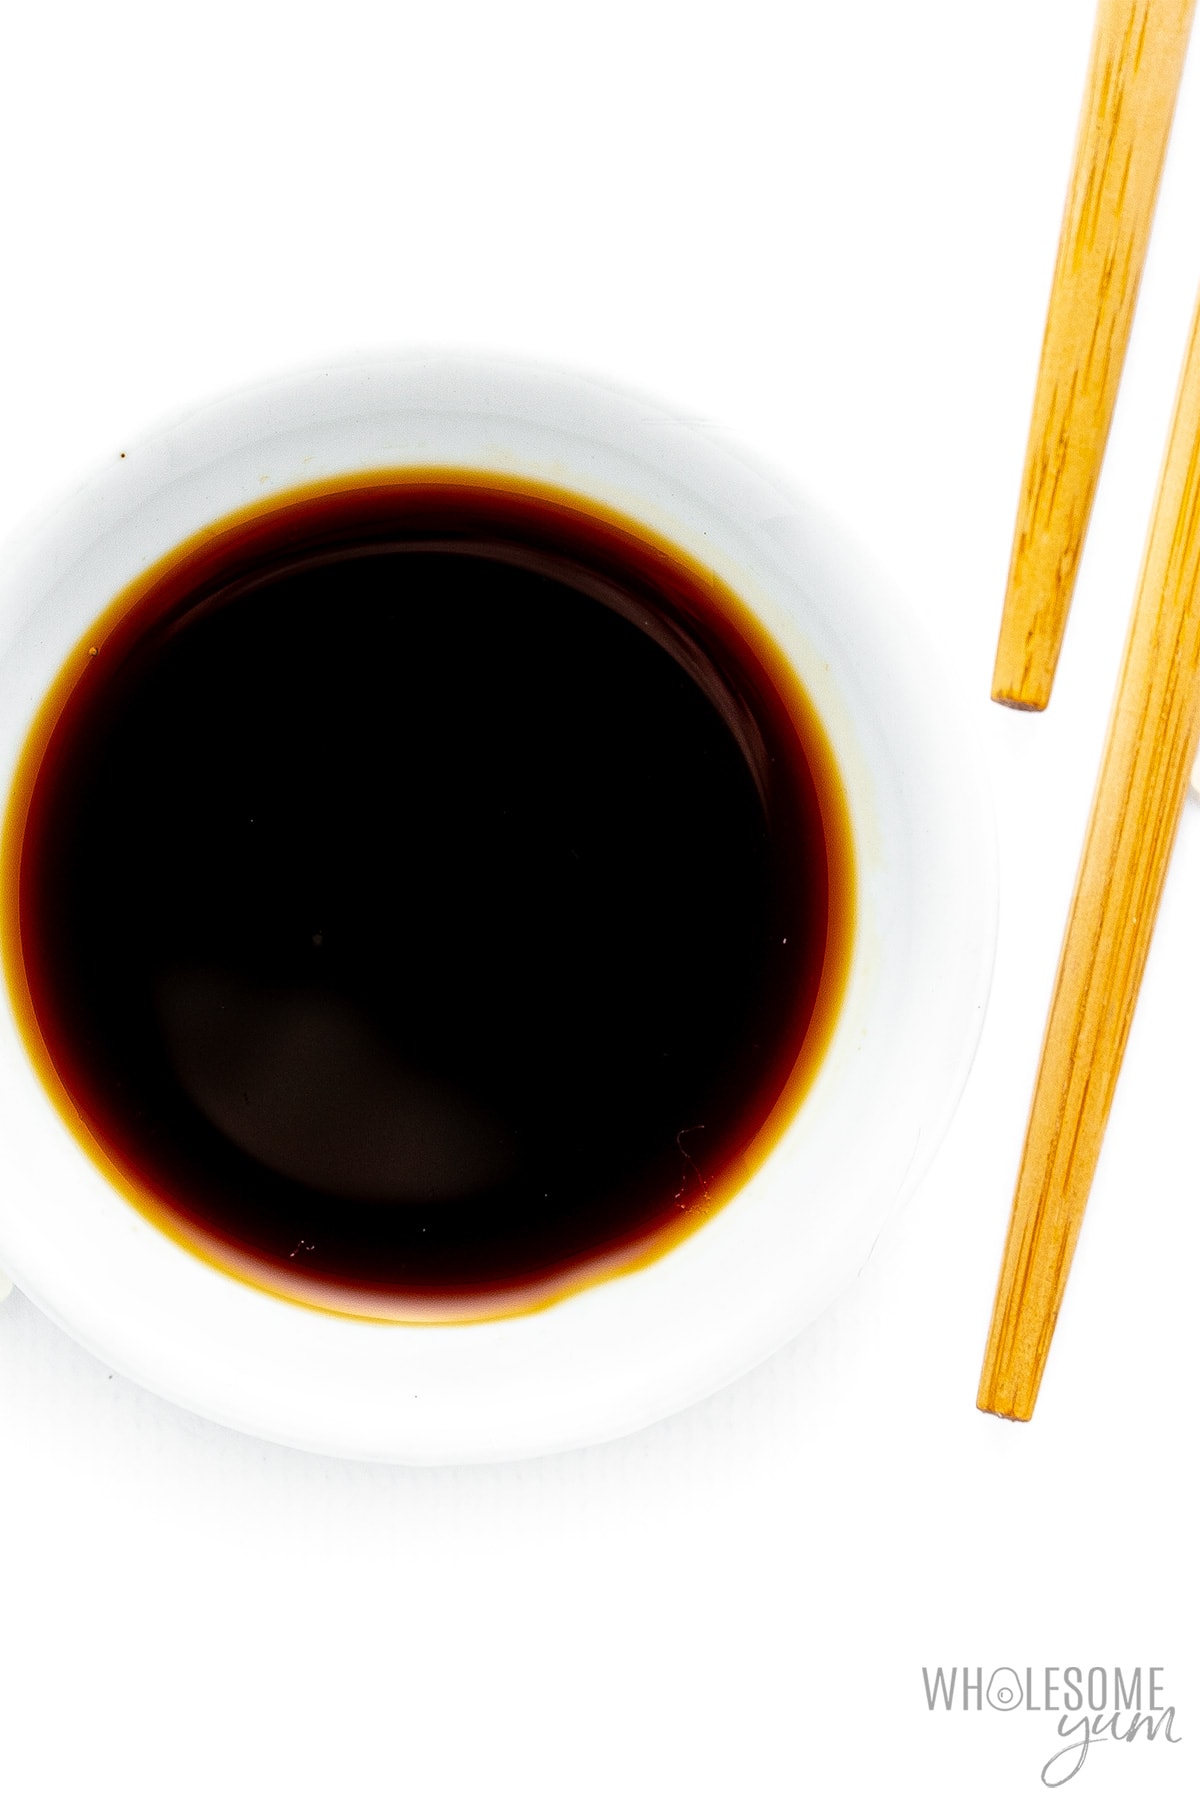 Soy sauce in bowl next to chopsticks.